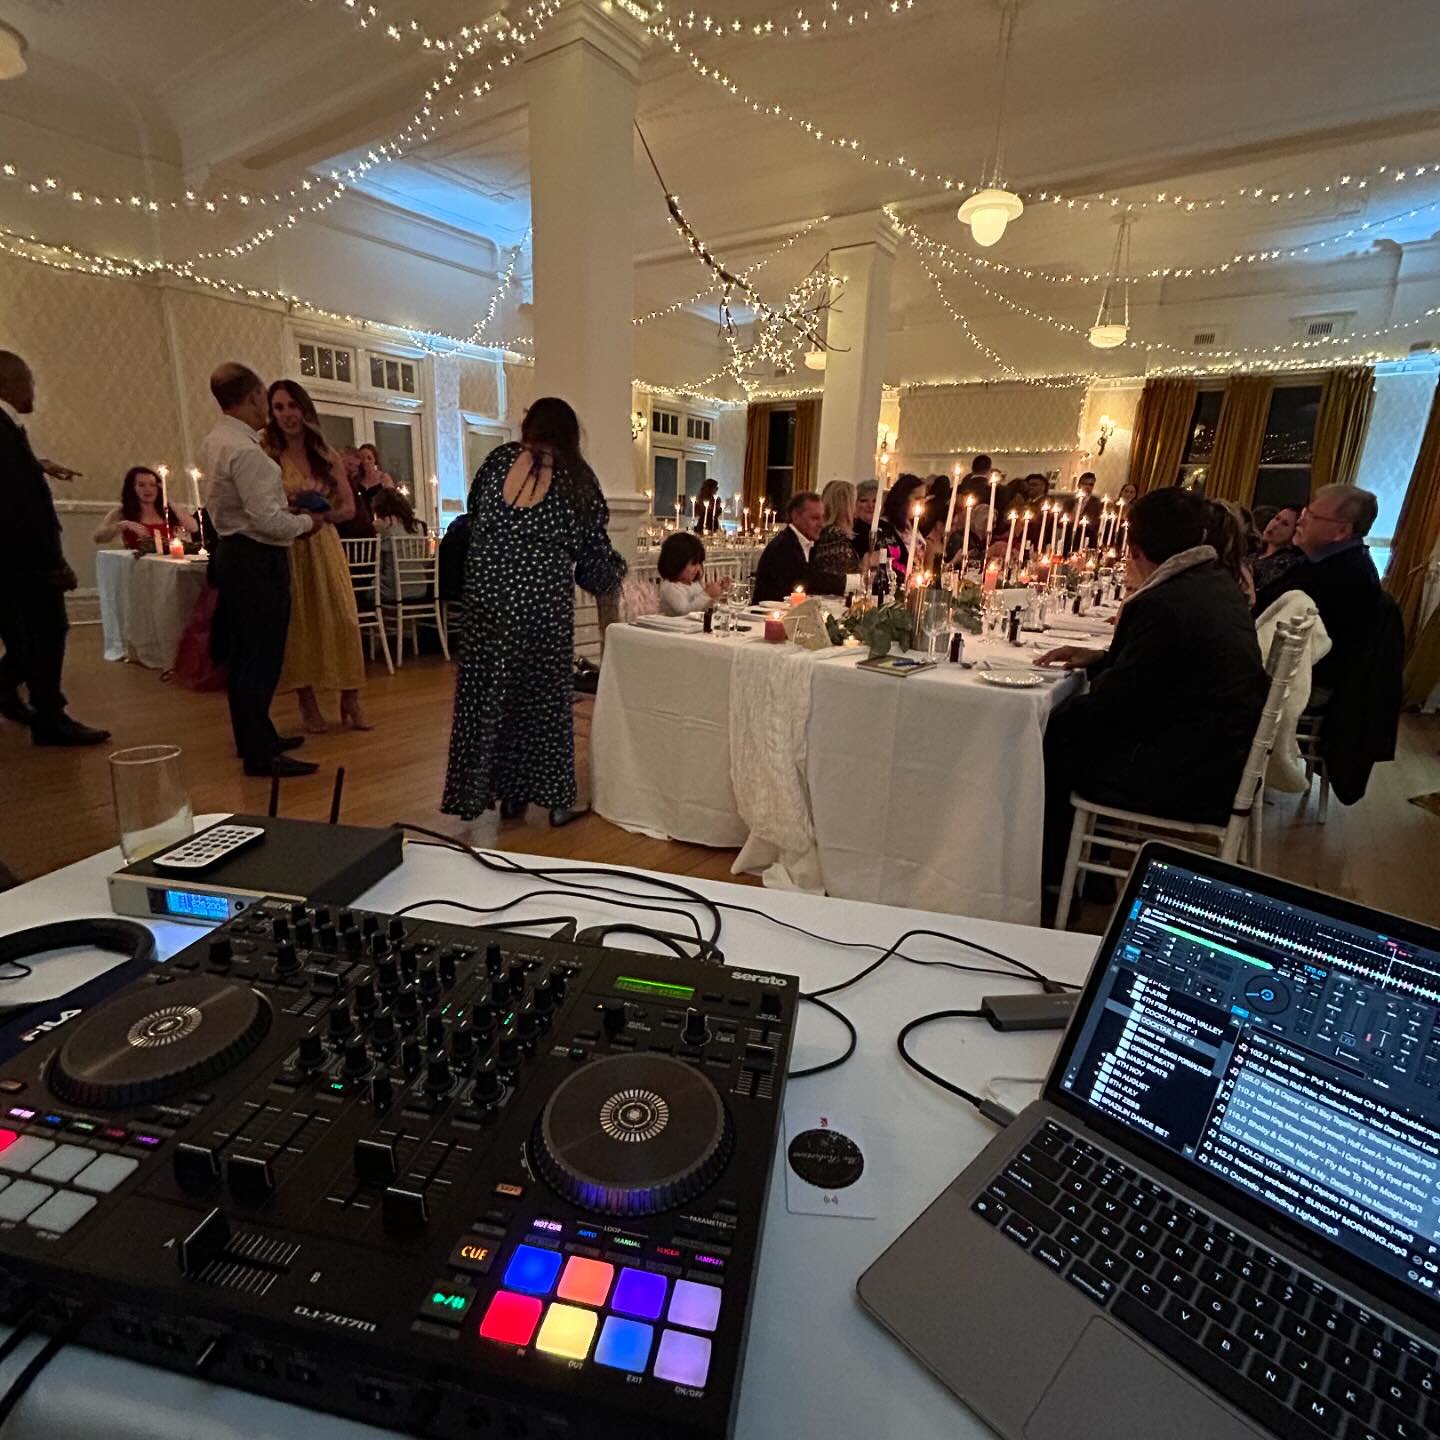 jjkentertainment One Shop that does the lot We have Sydney Wedding DJs and Sydney MCs available for your next event visit our website for more information www.jjkentertainment.com
Venue @therobertsonhotel 
Deejay @deejayjimmyv

#weddingmusic #wedding